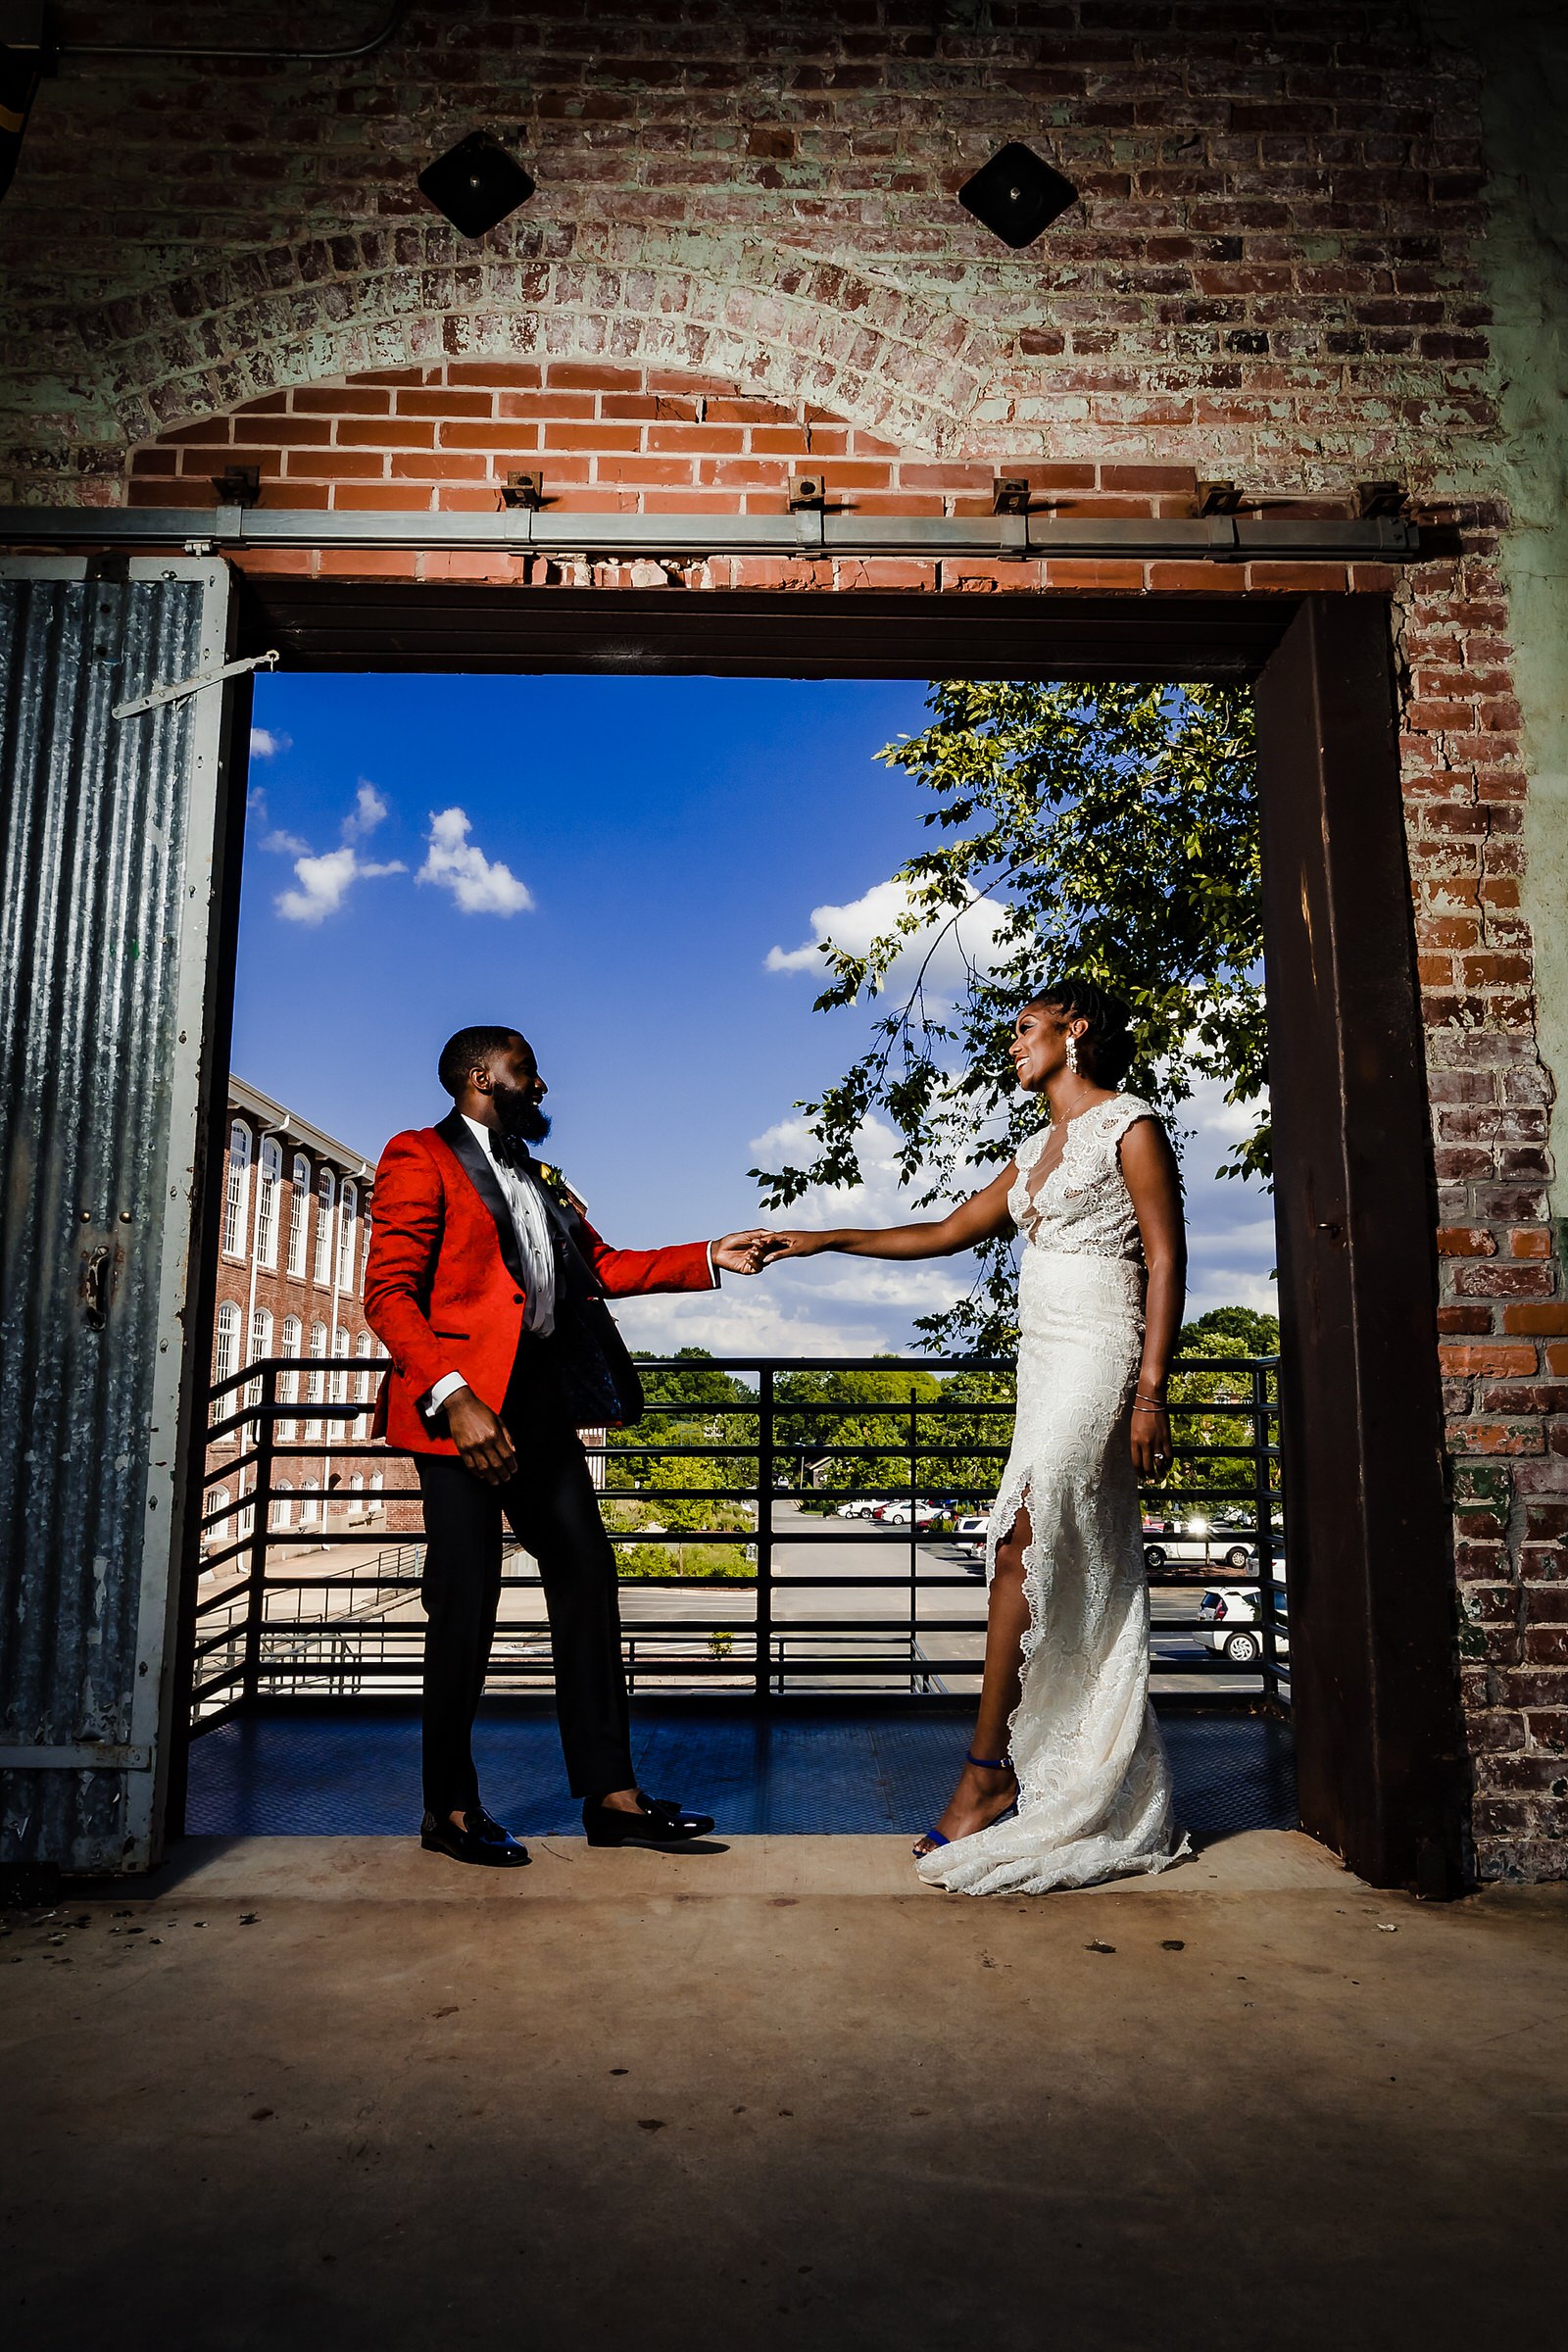 A Black couple laughs and dances in wedding gown and custom red suit at Belt Line Station in Durham, NC